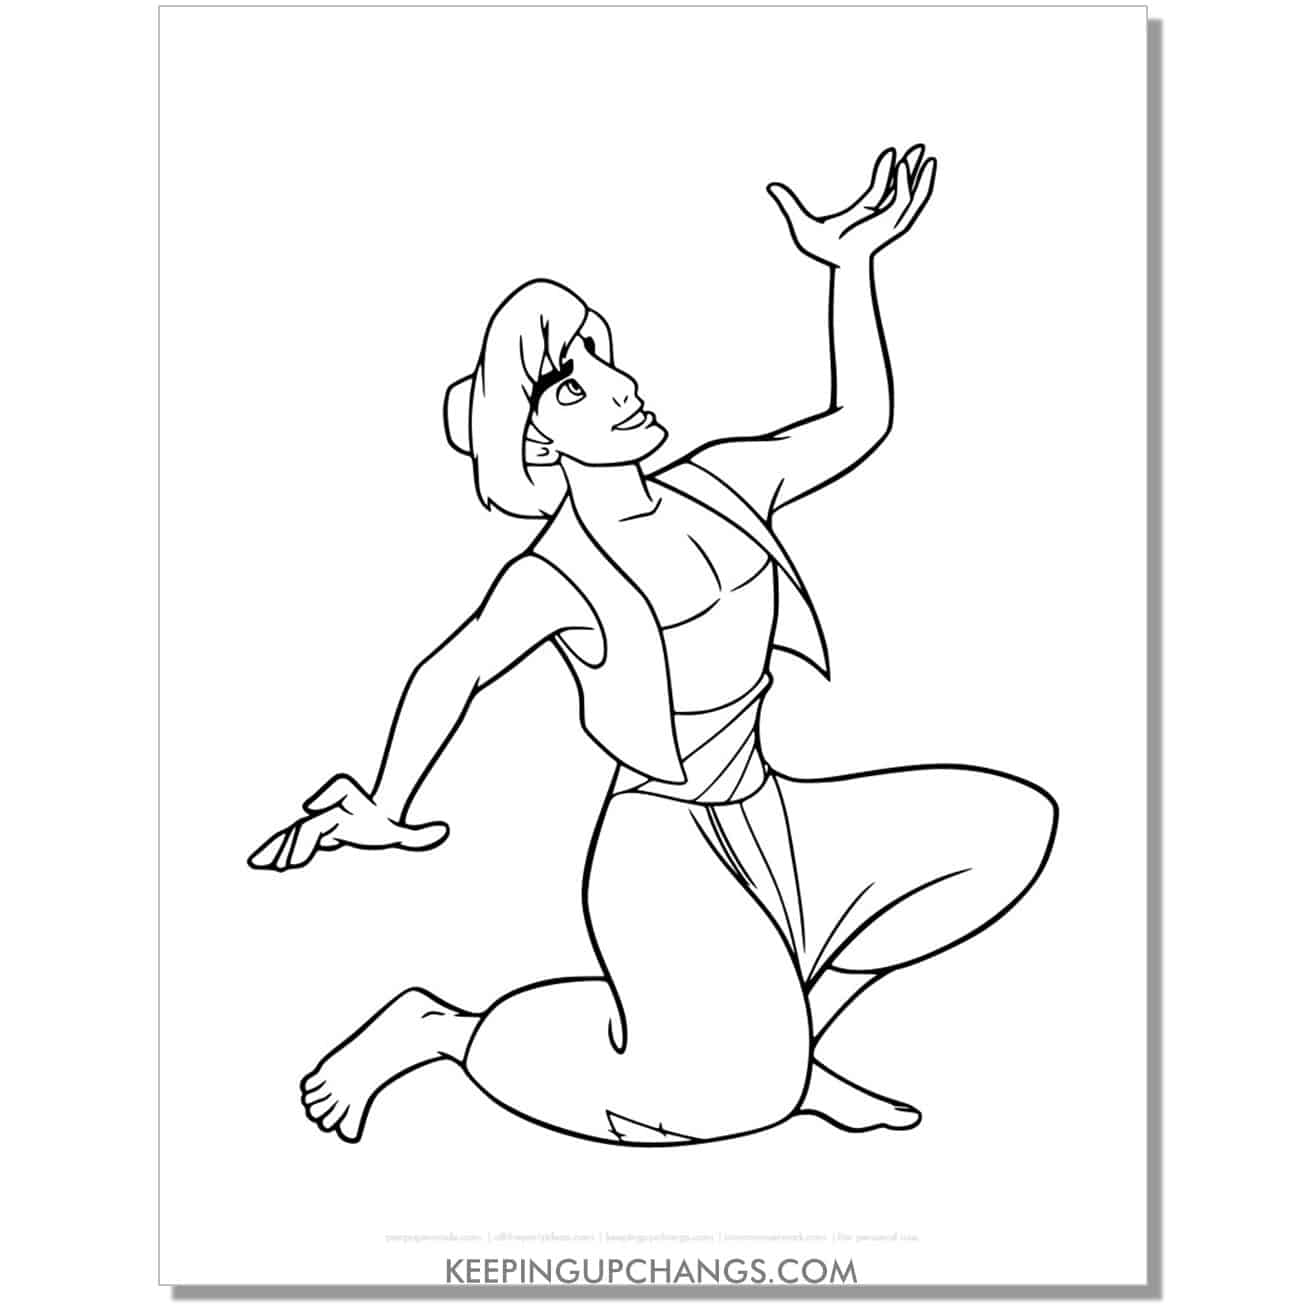 aladdin on knees coloring page, sheet.